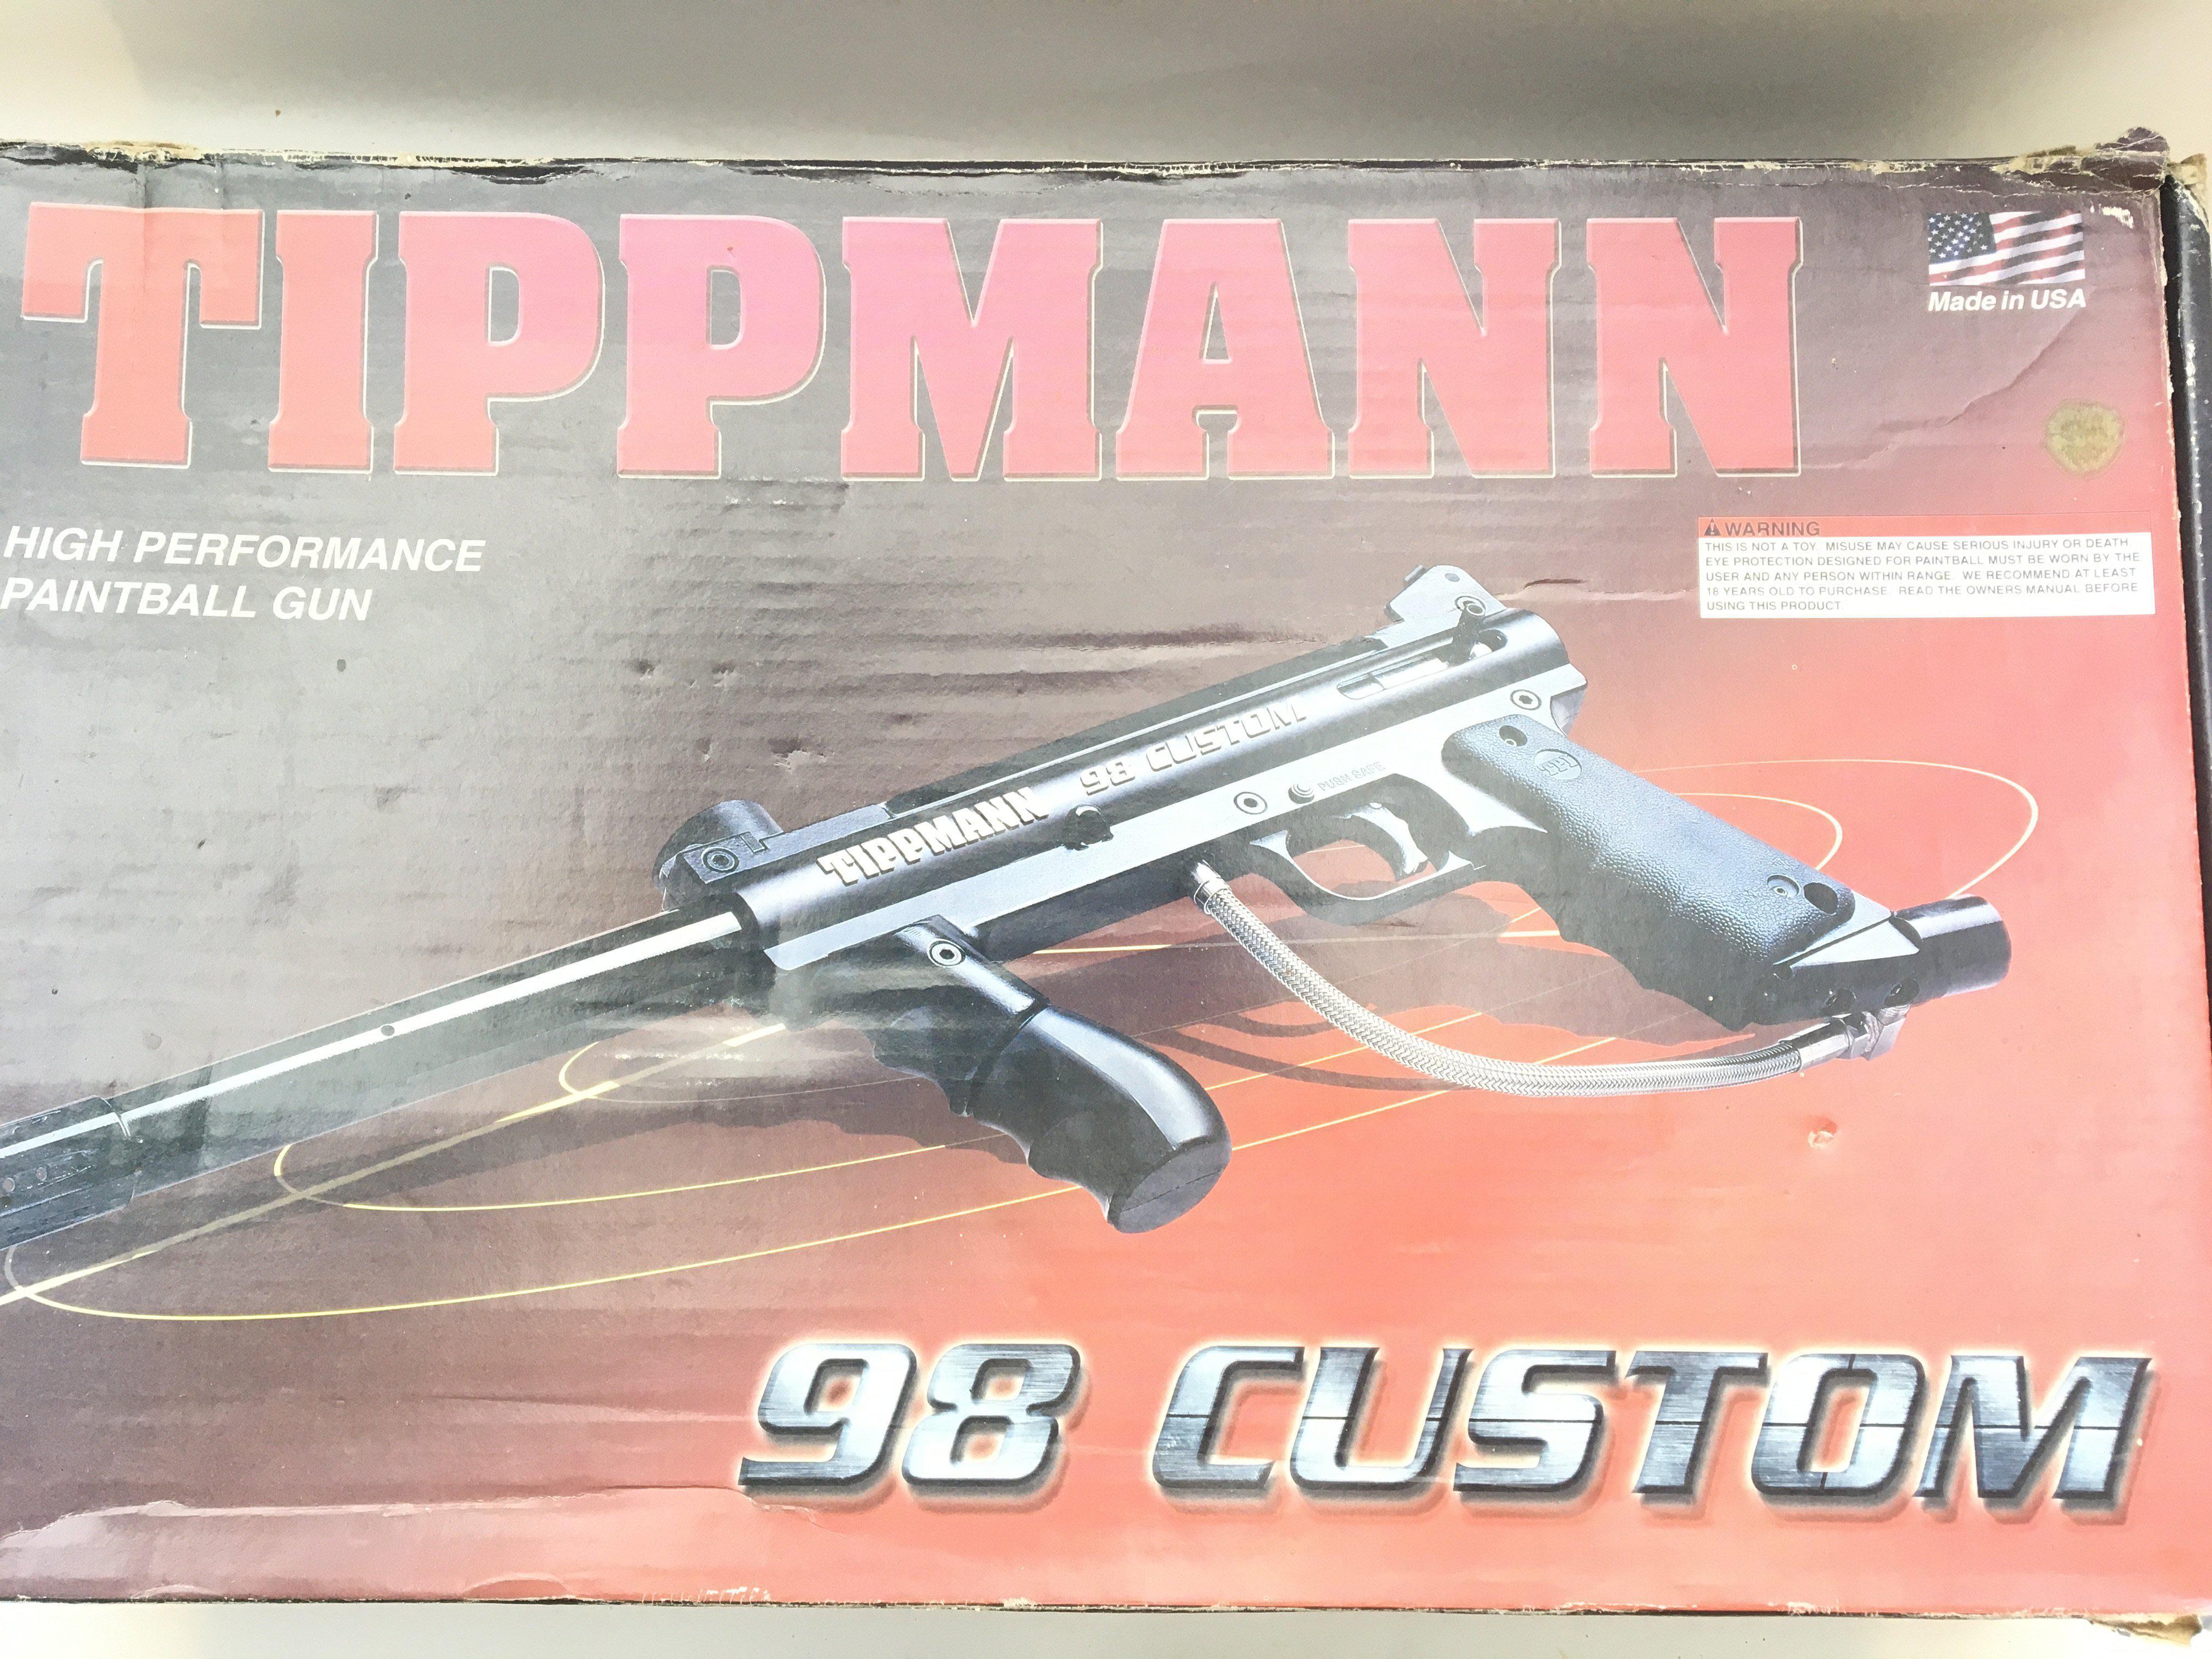 A Tippmann high performance paintball gun 98 custom used and boxed - NO RESERVE